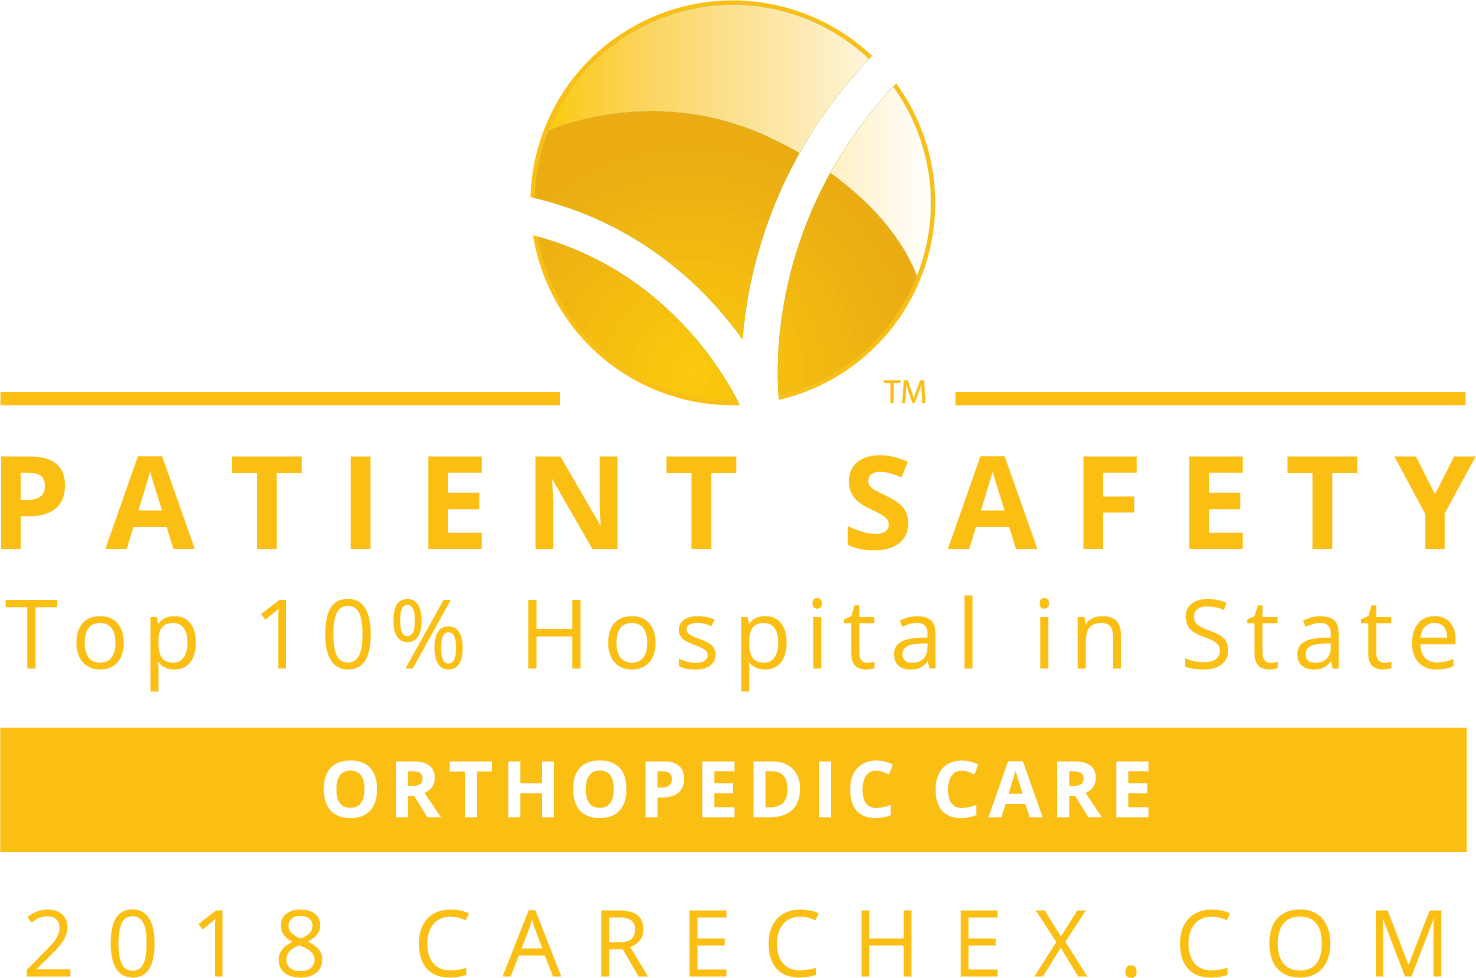 Williamson Medical Center 2018 CareChex Award - Top 10% of Hospitals in State for Patient Safety Orthopedic Care.